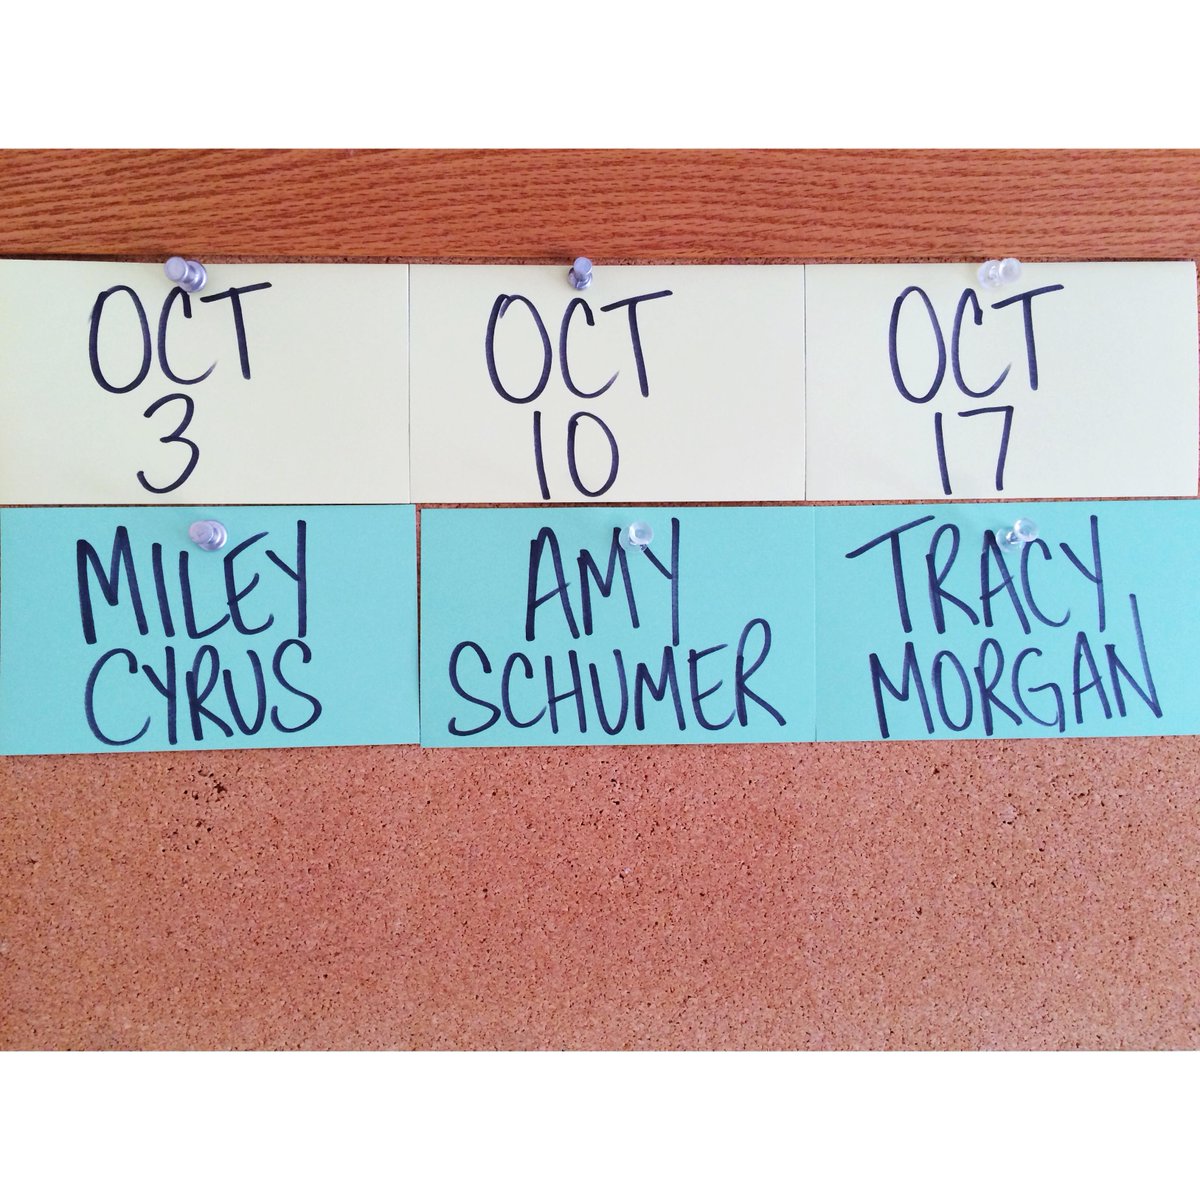 RT @nbcsnl: We’re excited to announce our first three hosts of Season 41: @MileyCyrus, @amyschumer, and @RealTracyMorgan! #SNL http://t.co/…